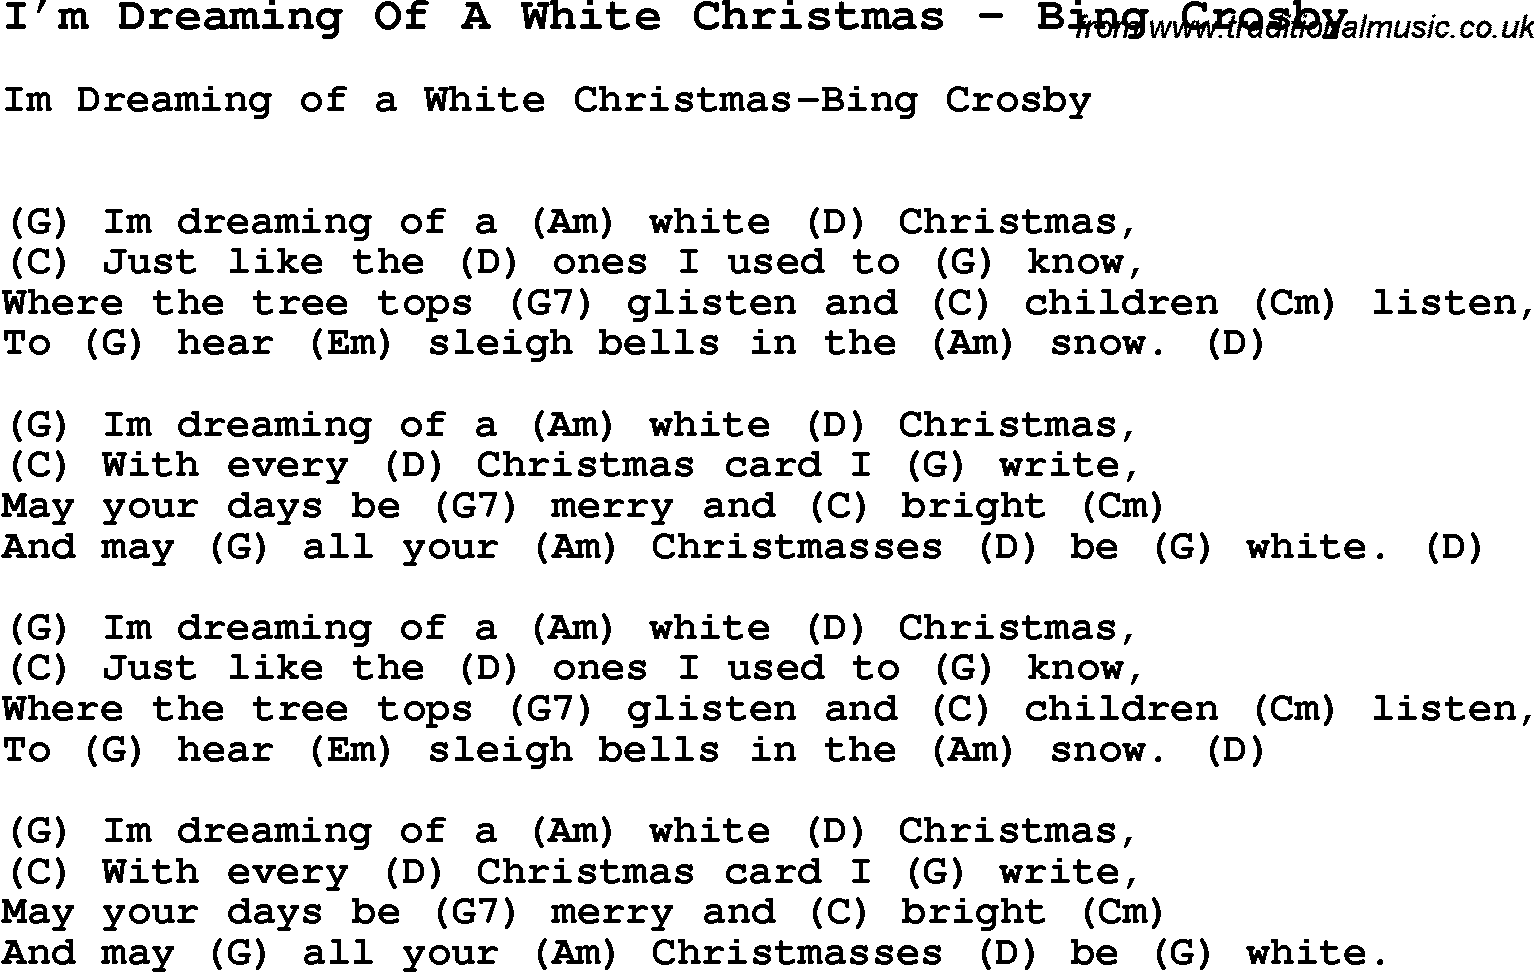 Song I’m Dreaming Of A White Christmas by Bing Crosby, with lyrics for vocal performance and accompaniment chords for Ukulele, Guitar Banjo etc.